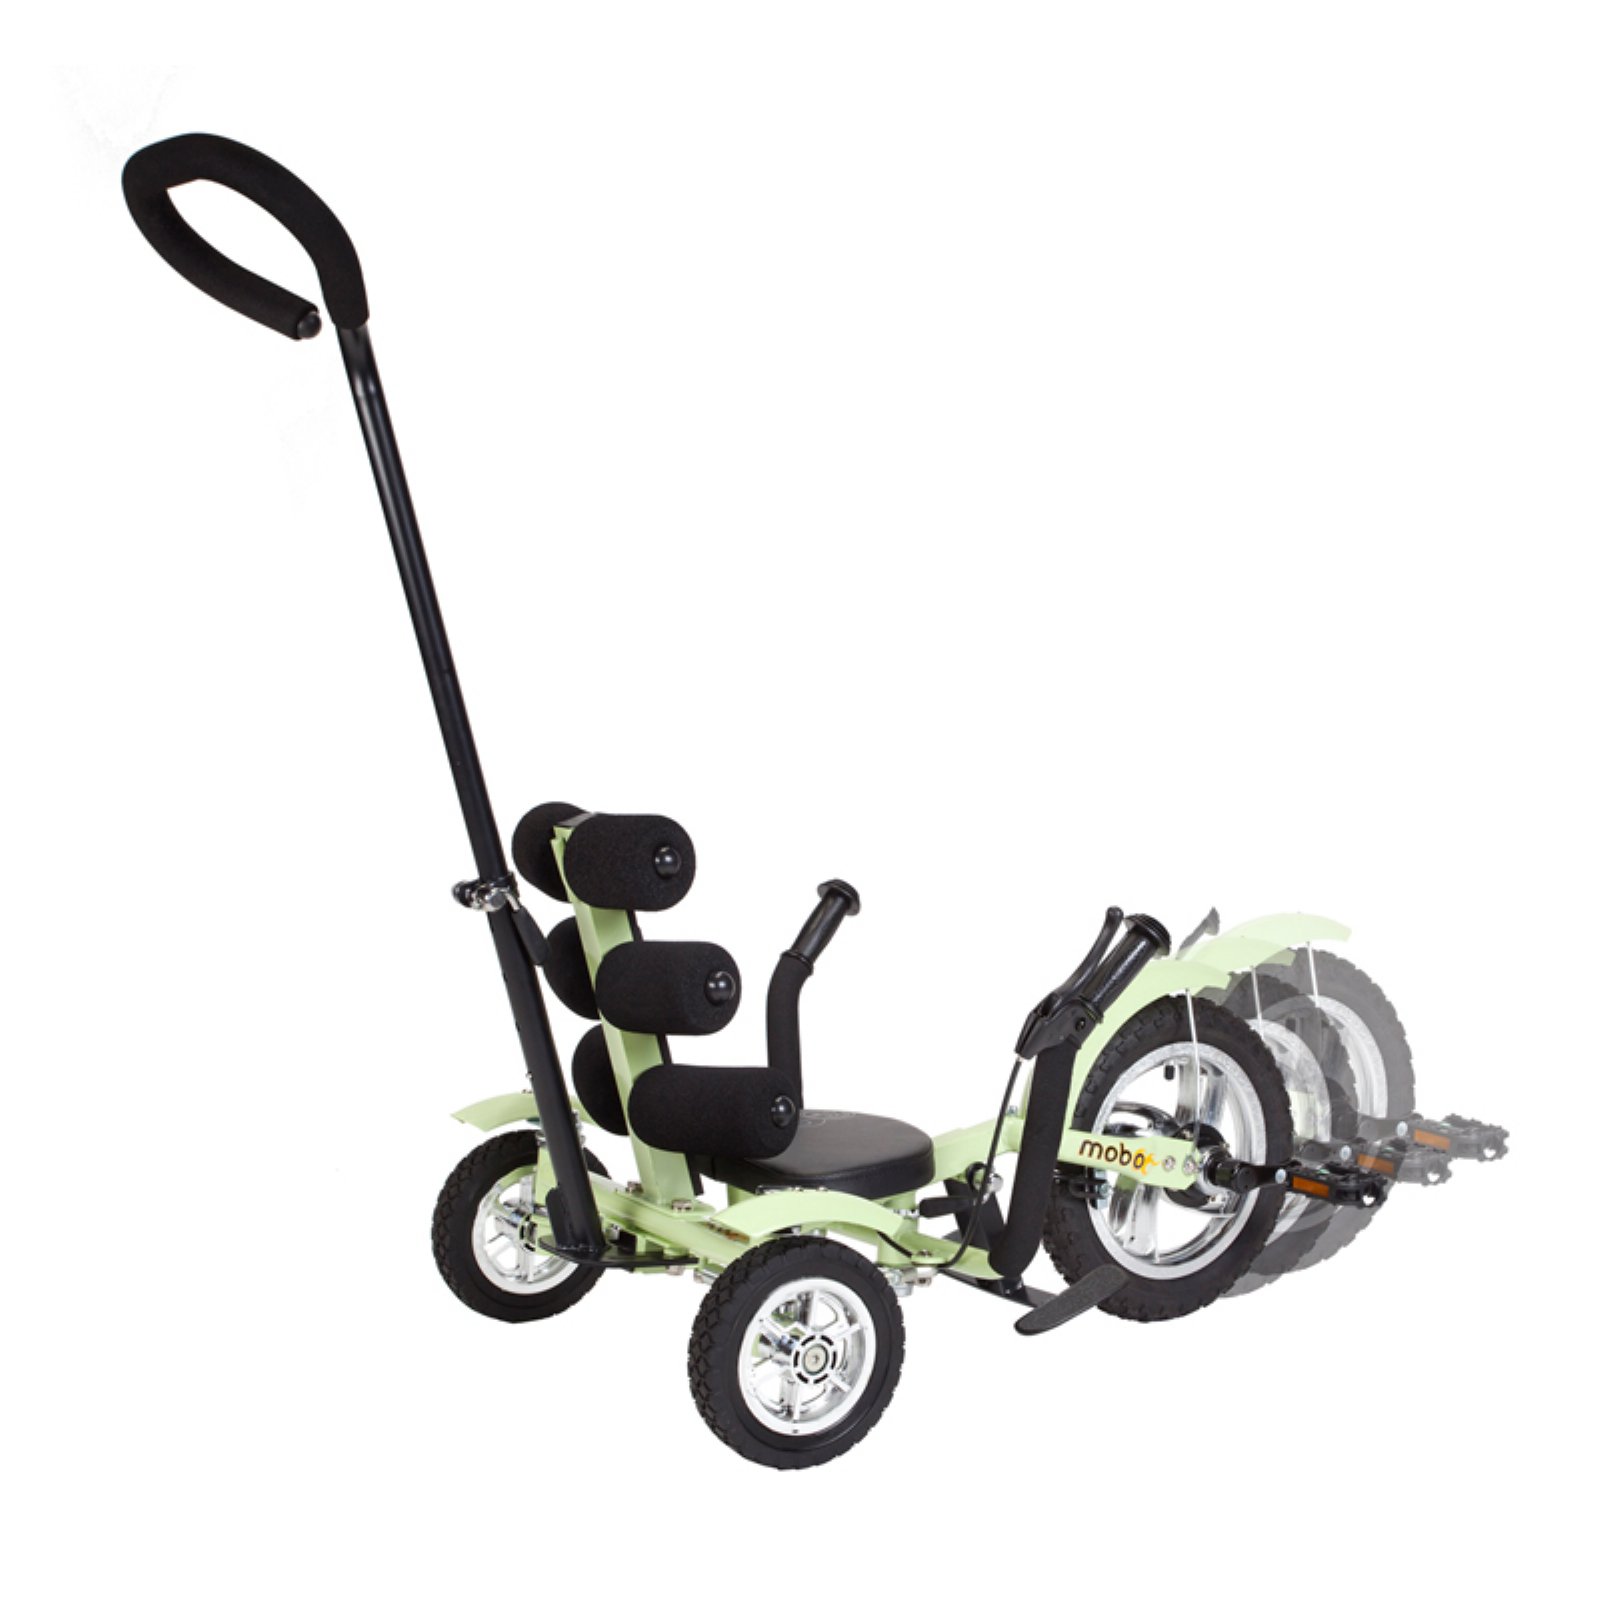 Mobo Mega Mini: The Roll-to-Ride 3-Wheeled Cruiser Tricycle, Push & Pedal Ride On Toy, Green - image 2 of 7